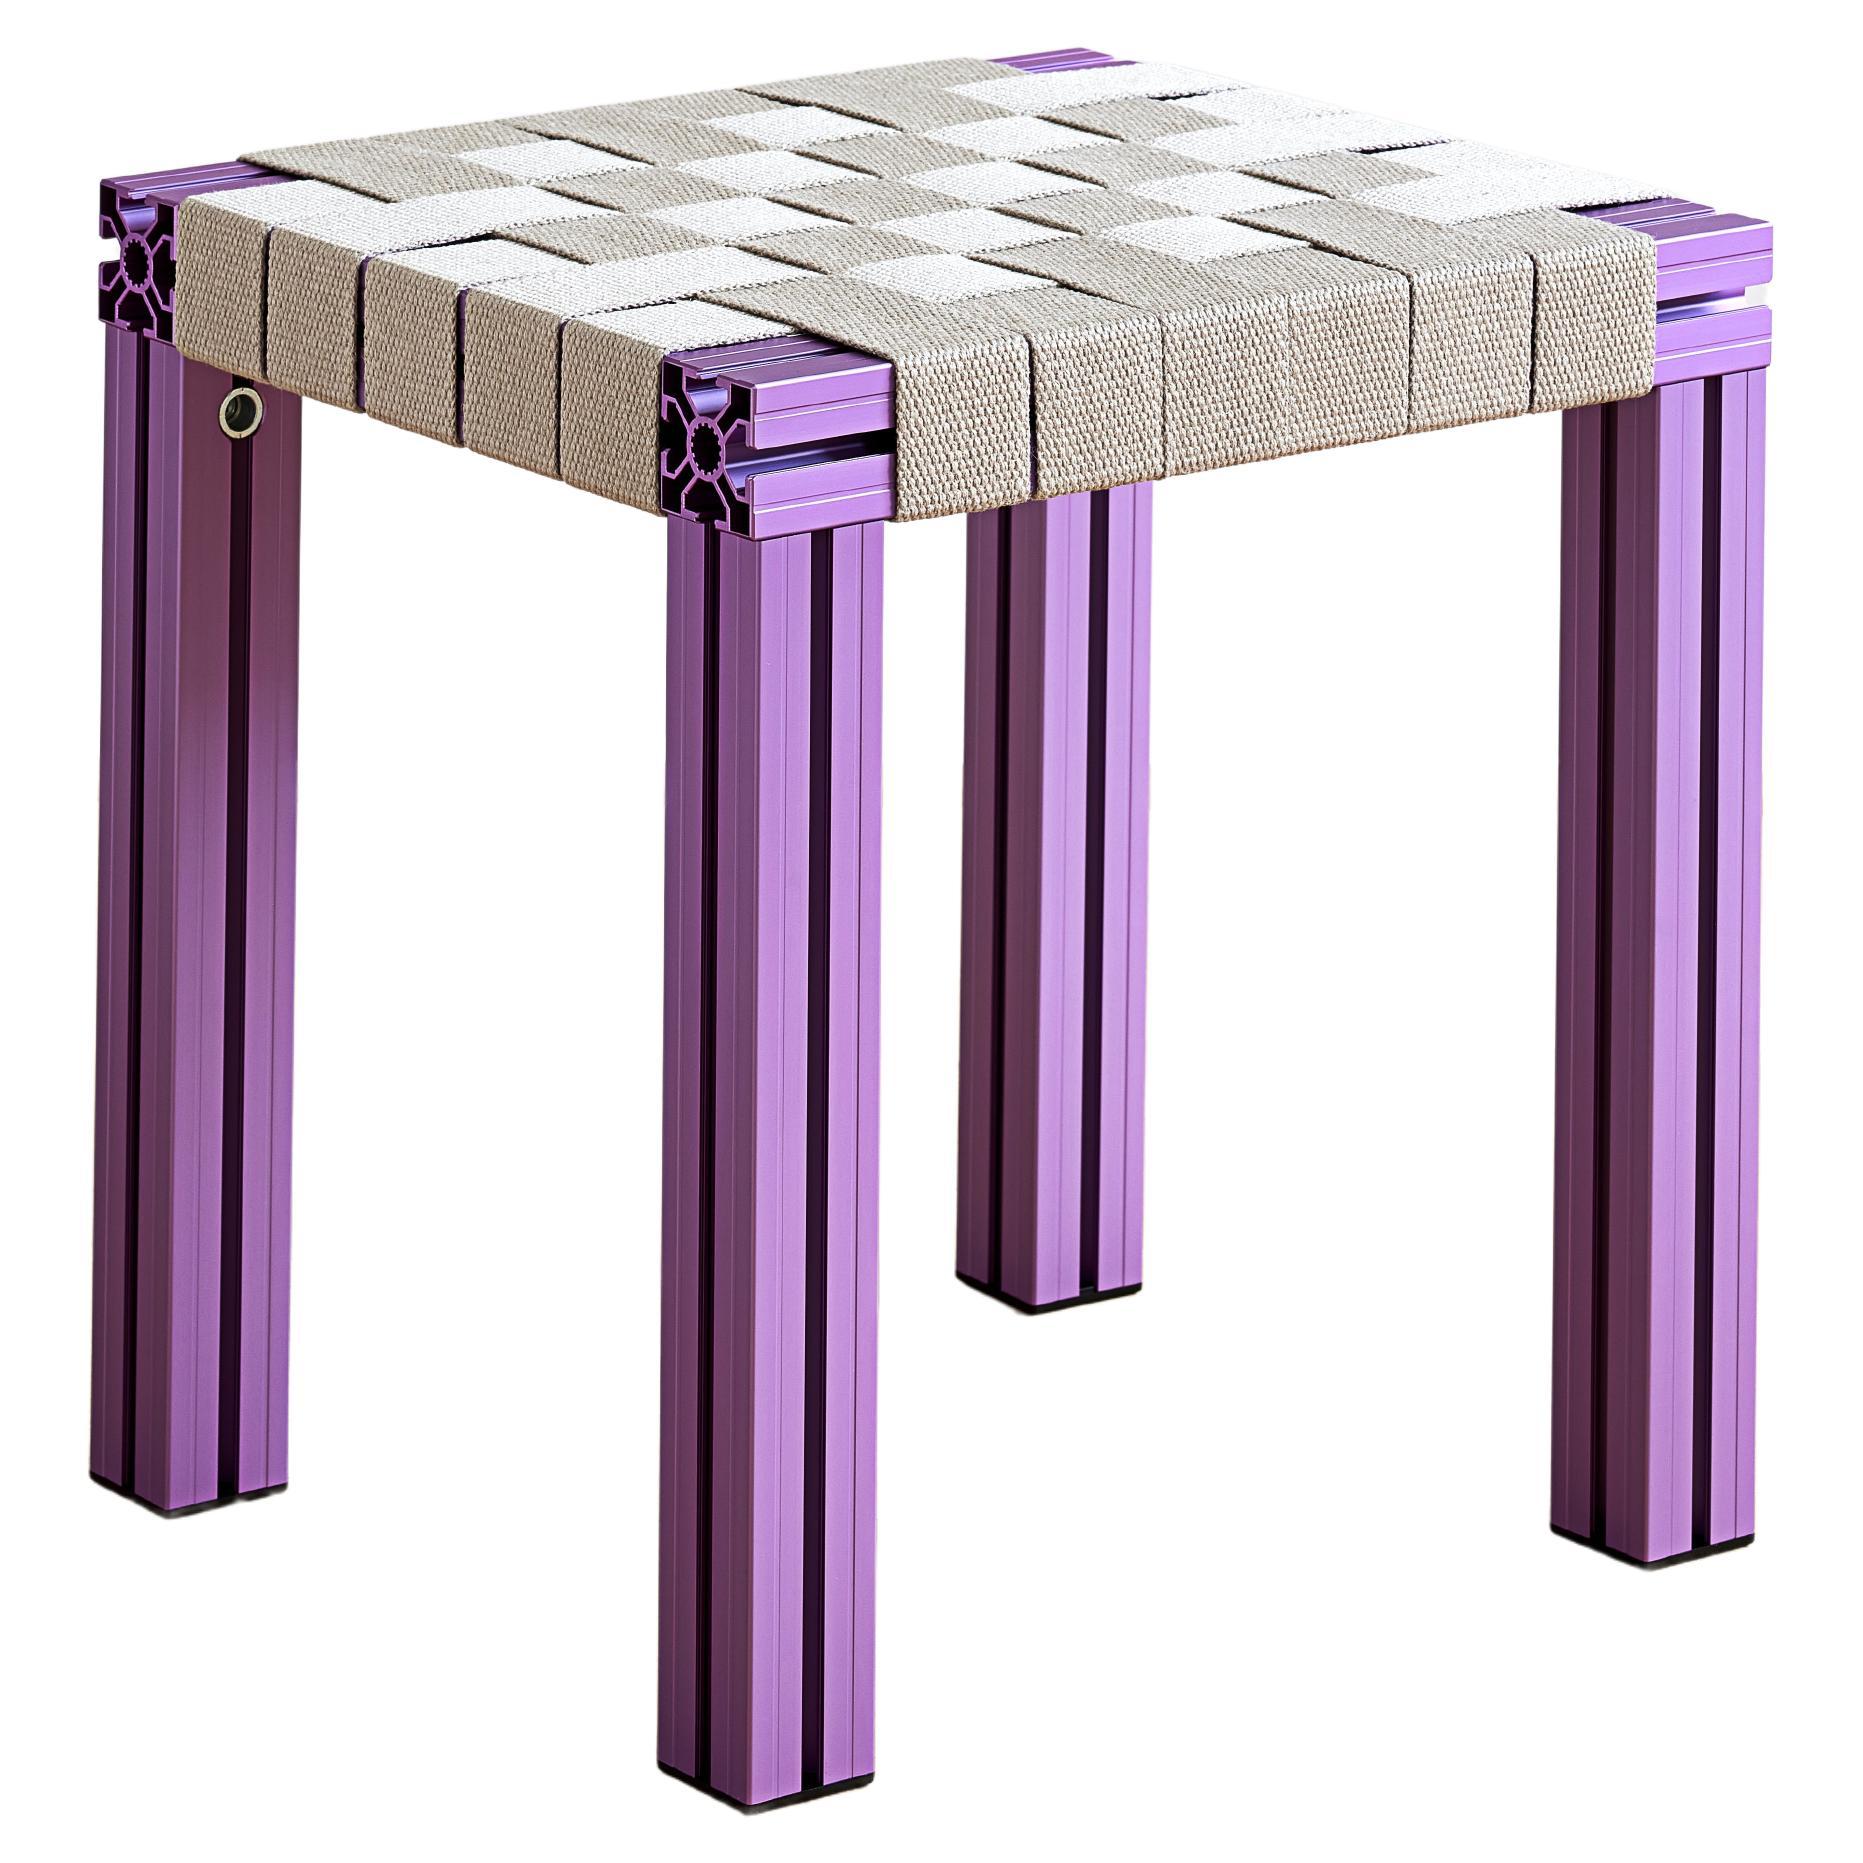 Lavender Aluminium Stool with Flax Webbing Seat from Anodised Wicker Collection For Sale